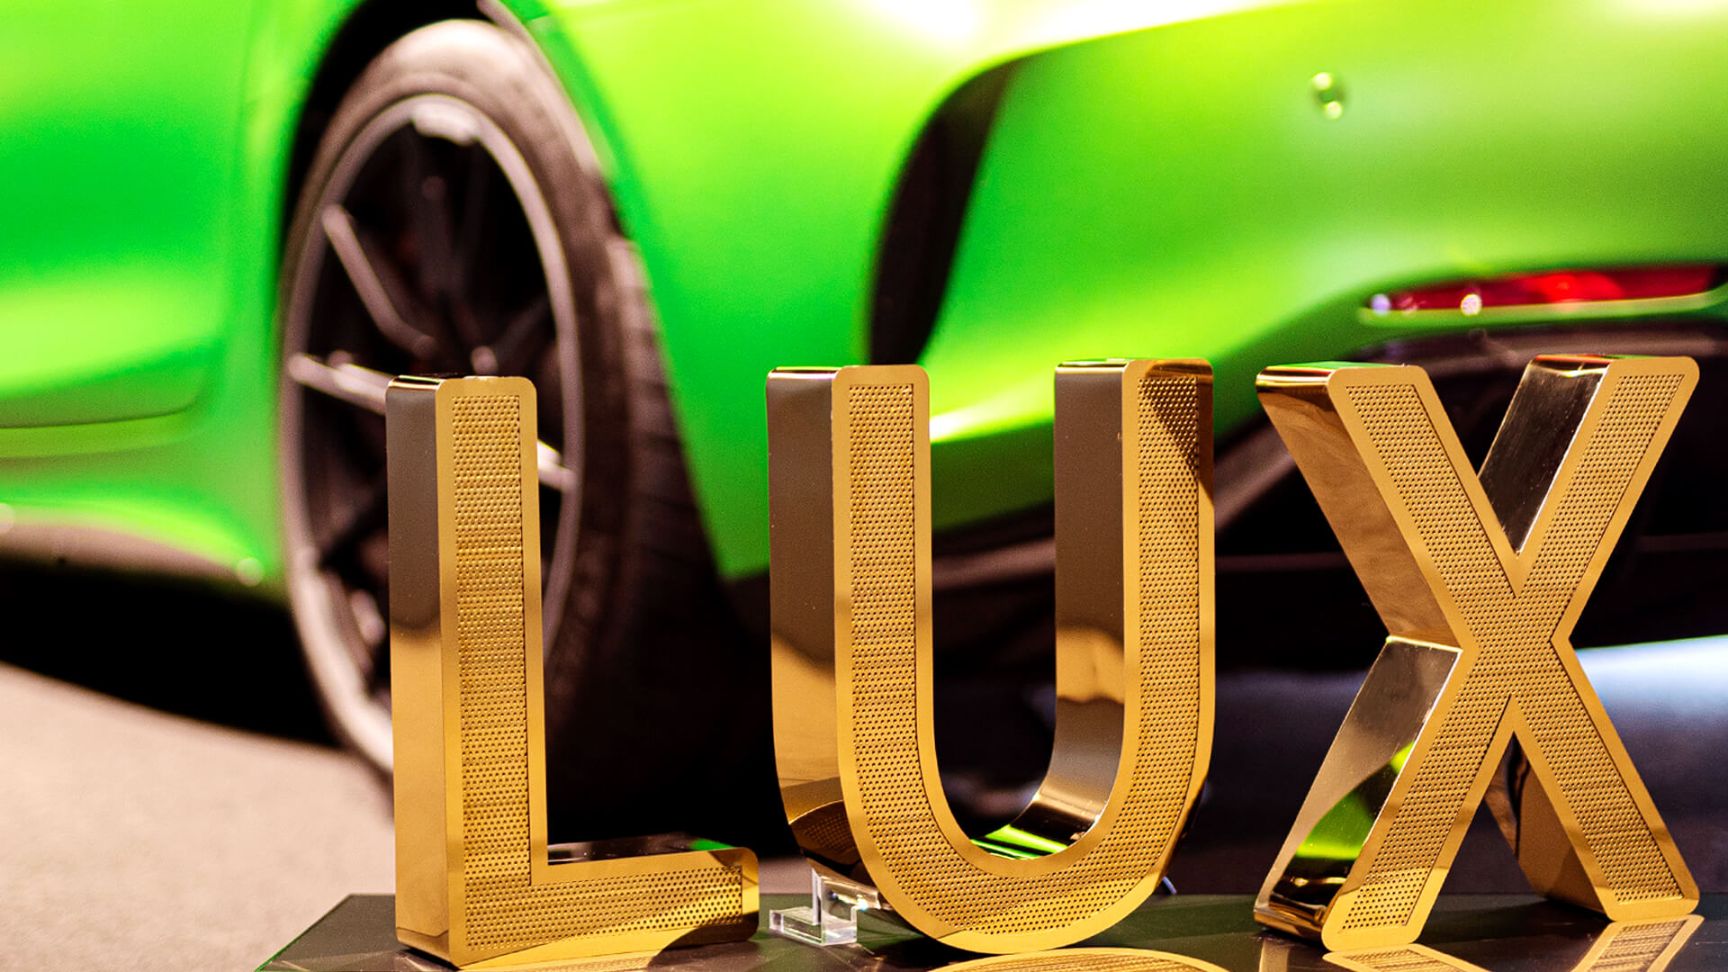 LUX perforated stainless steel letters - LUX letters in gold shiny perforated stainless steel in Mercedes showroom